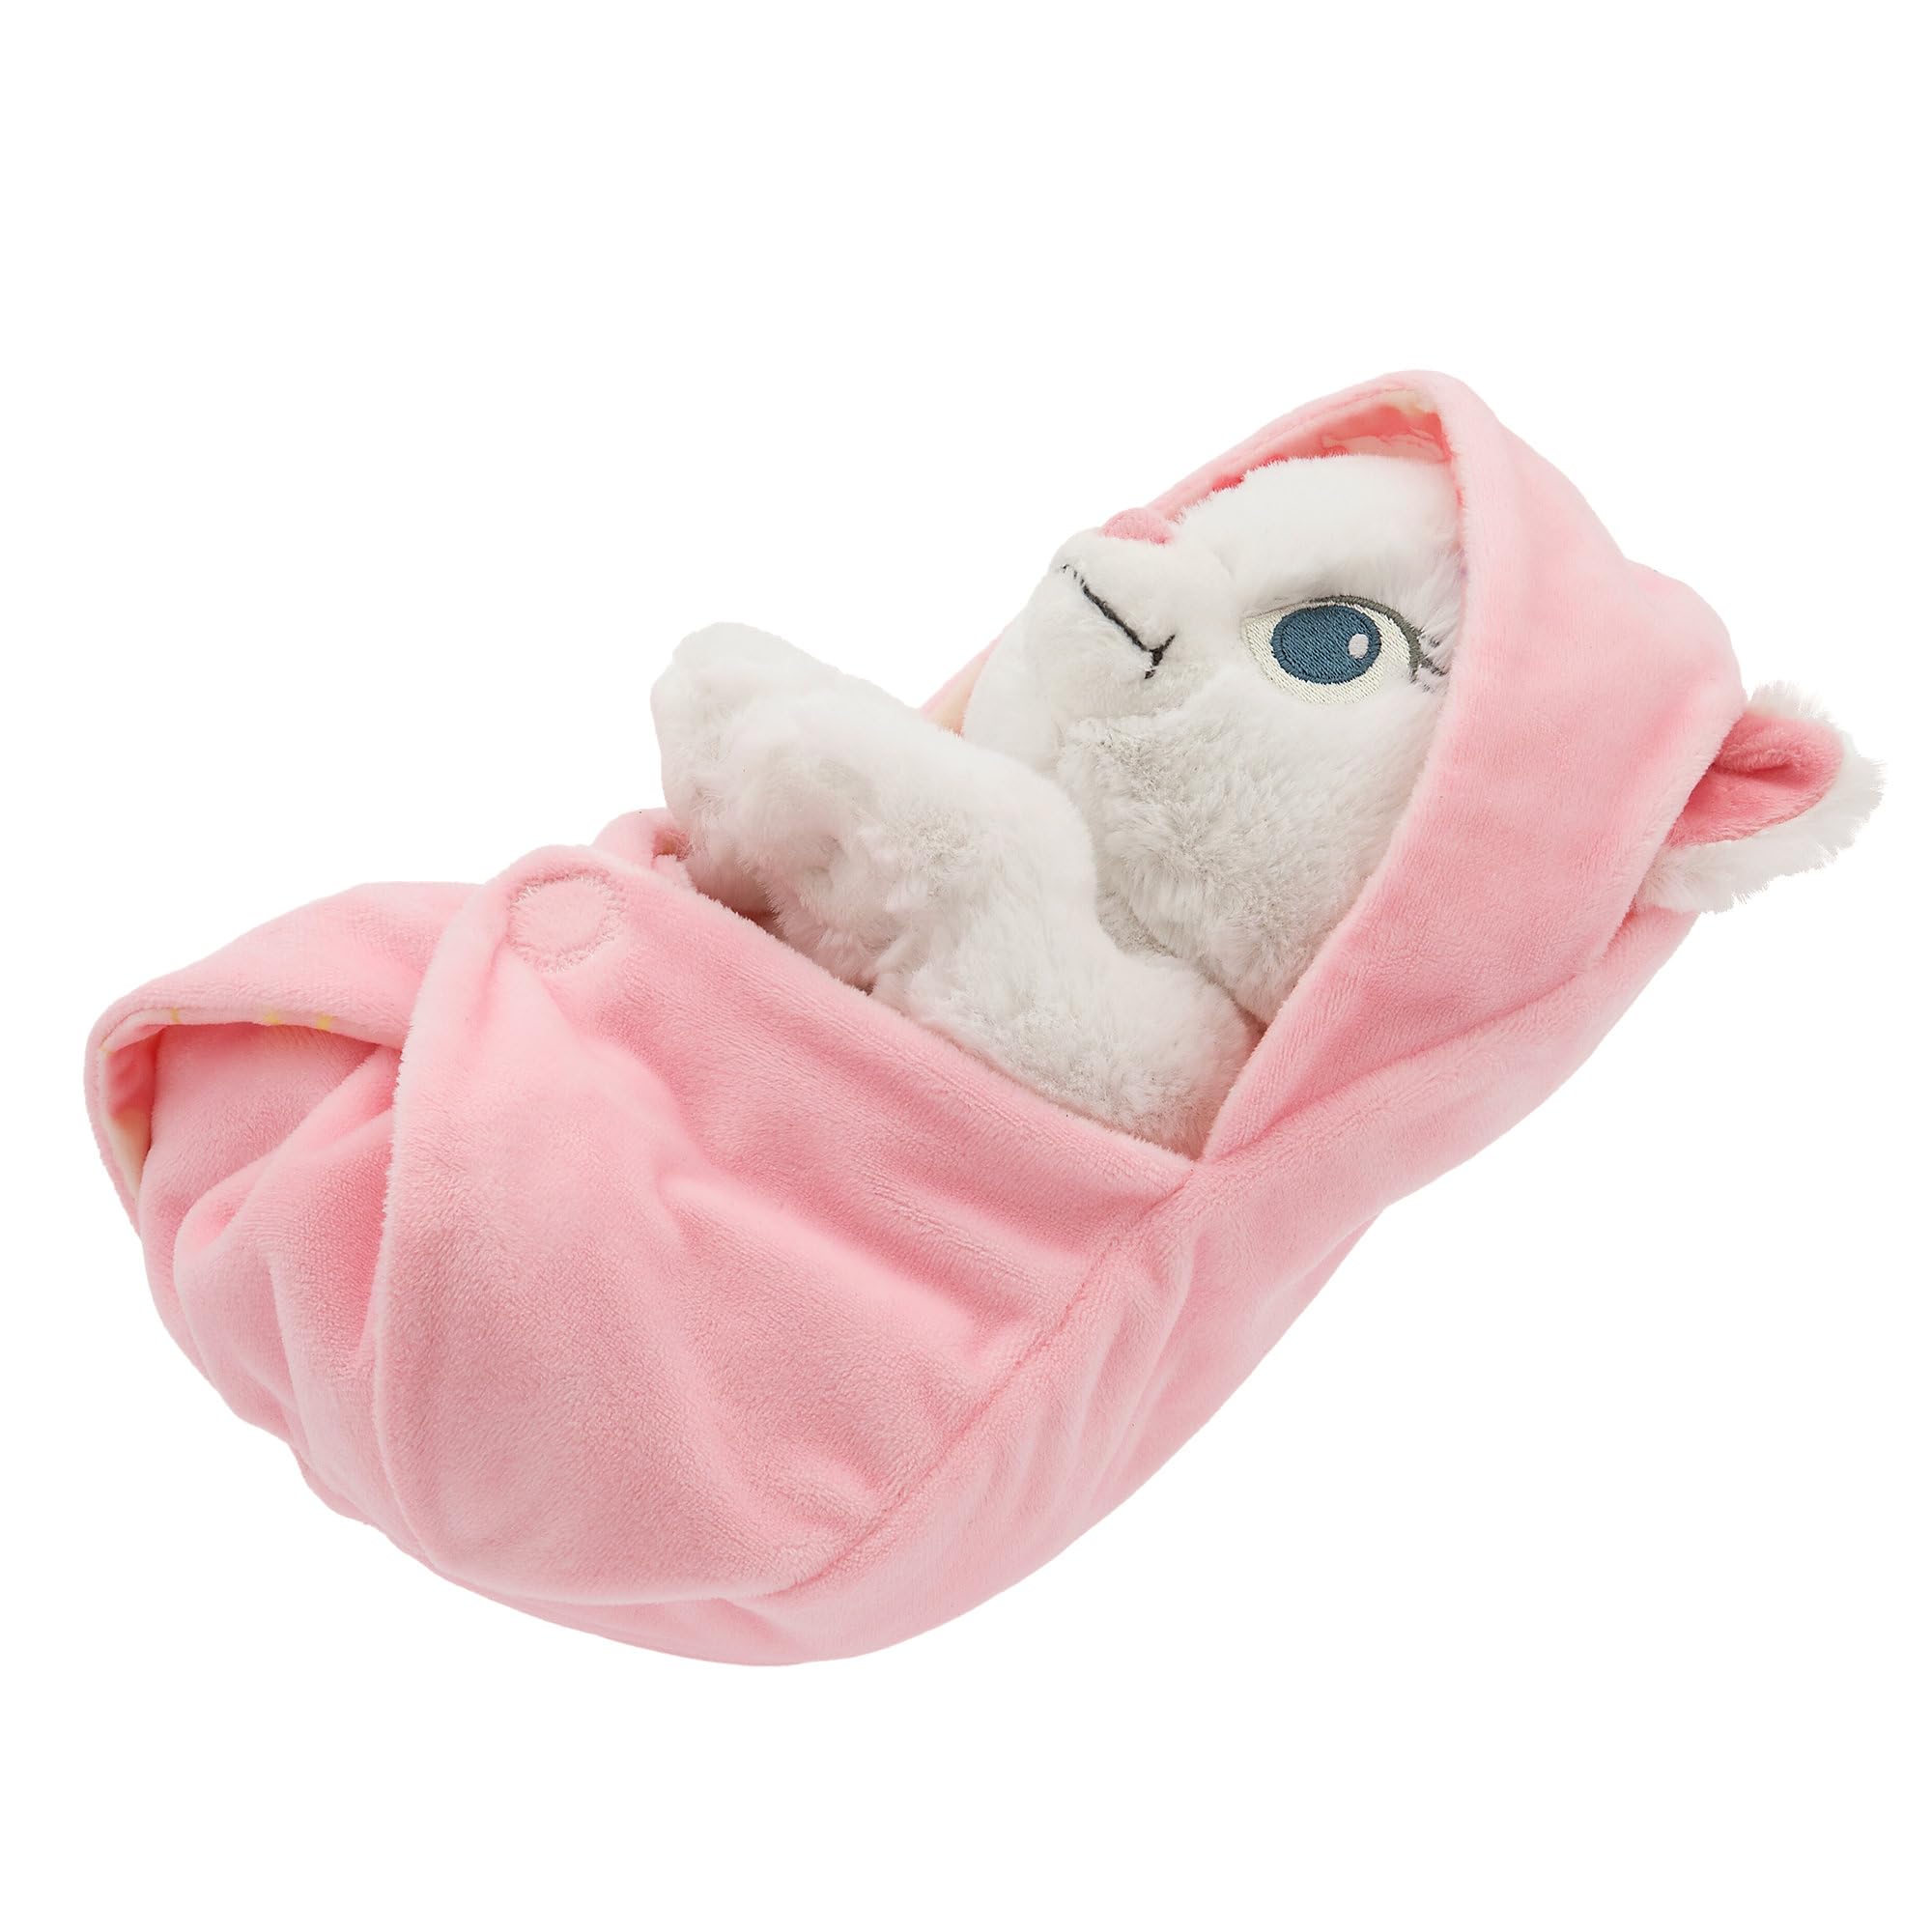 Disney Store Official Babies Collection: 10-Inch Marie from The Aristocats Plush in Swaddle - Official Soft Toy - Perfect for Fans & Kids